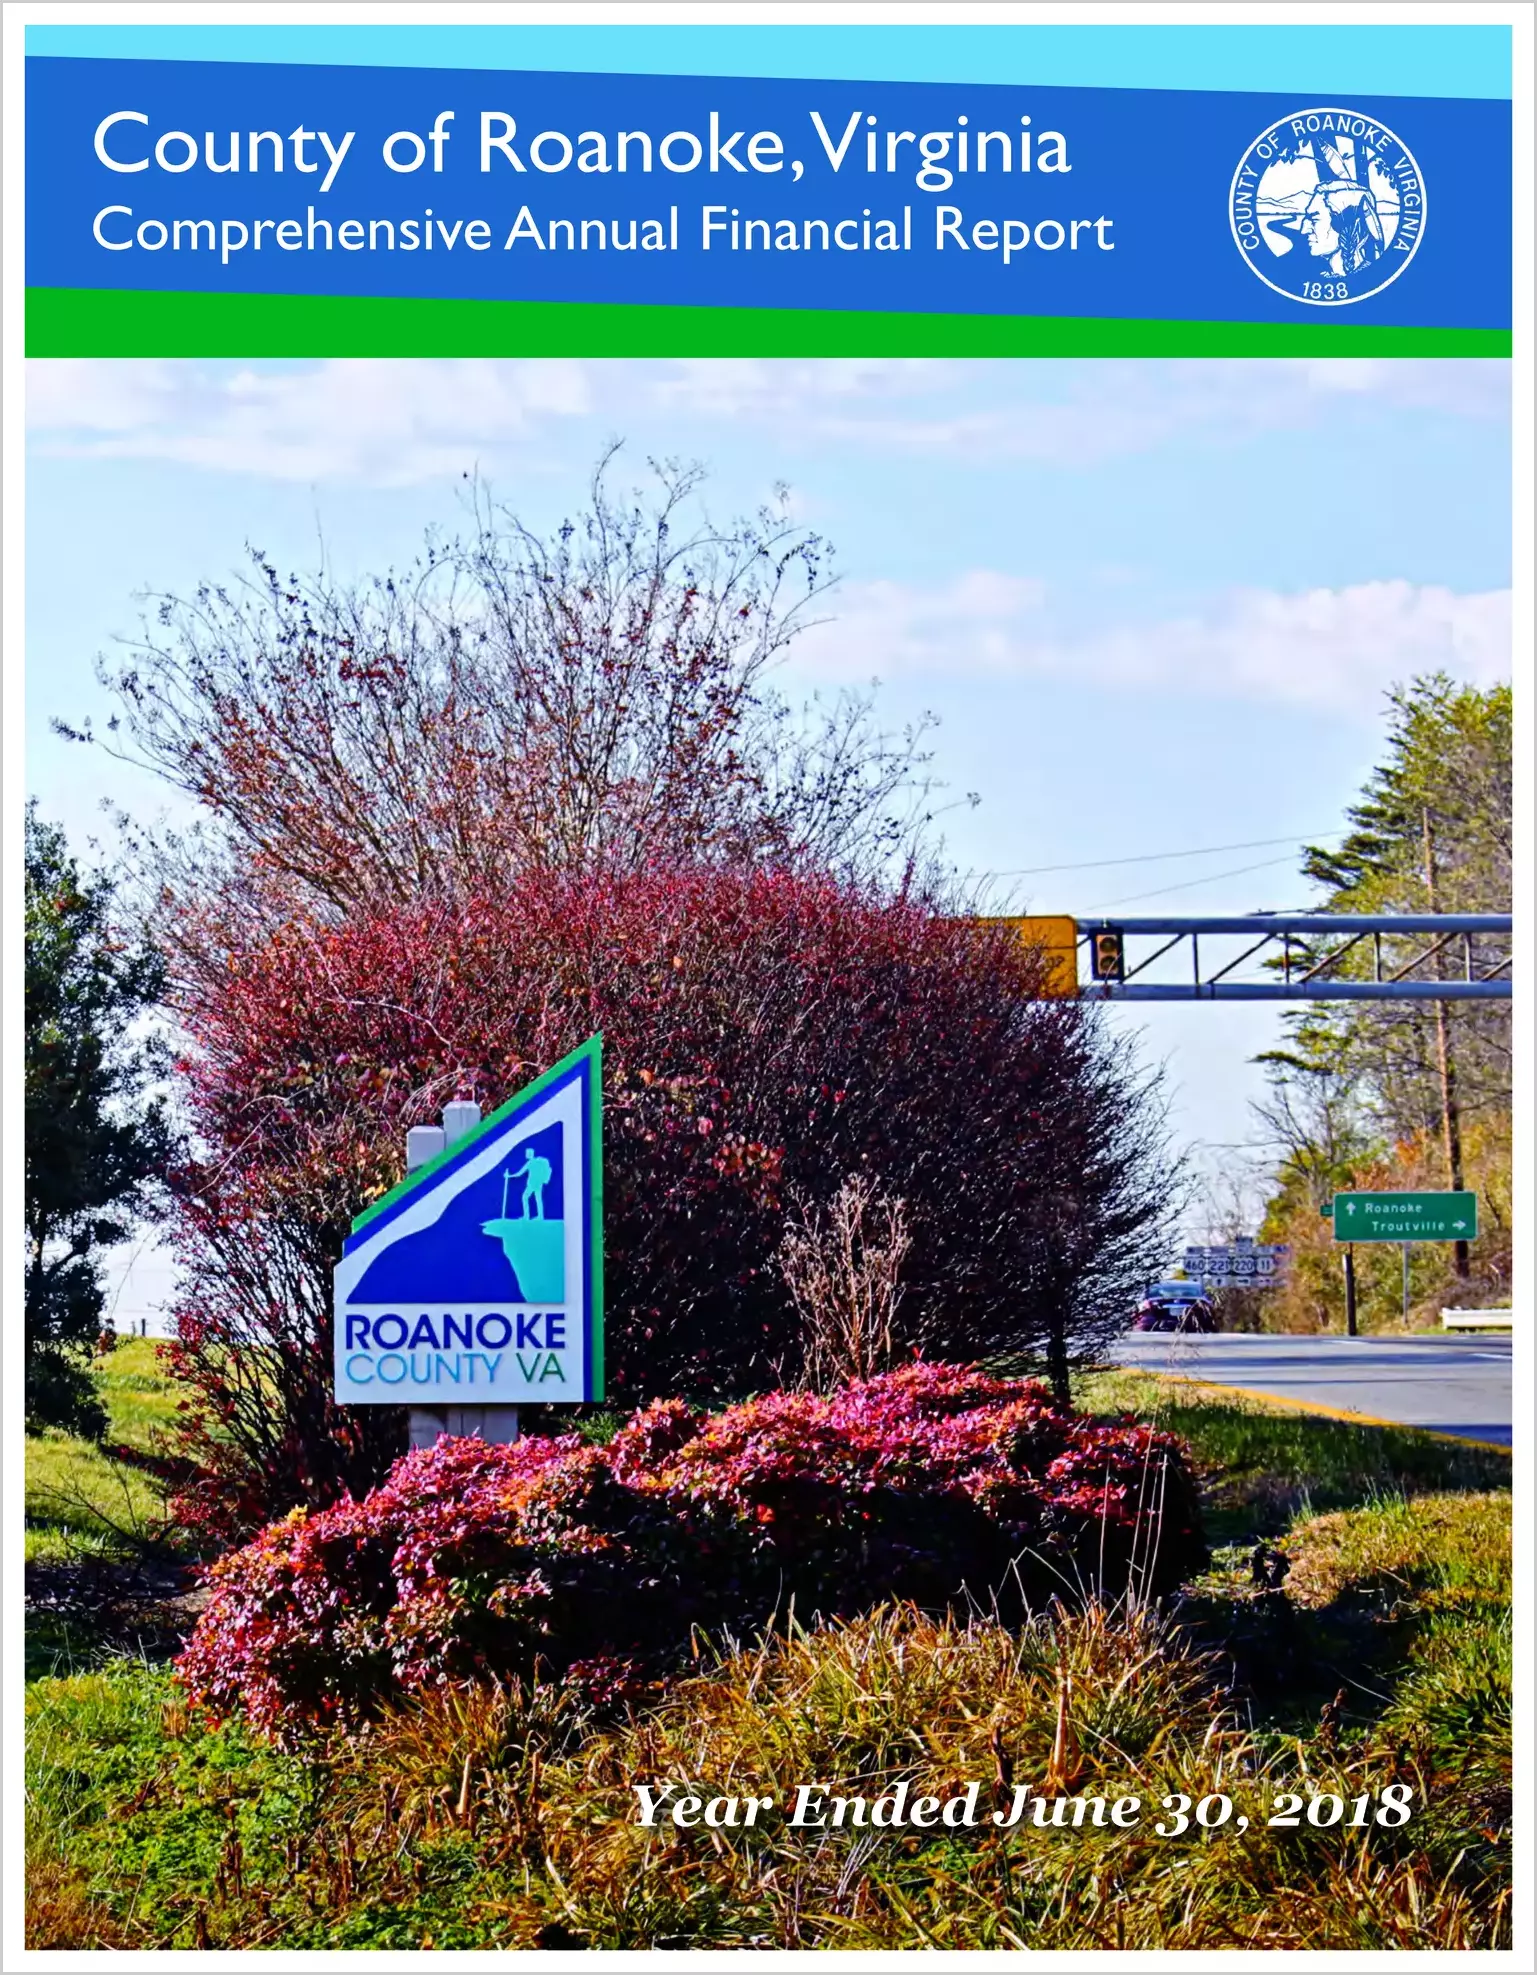 2018 Annual Financial Report for County of Roanoke